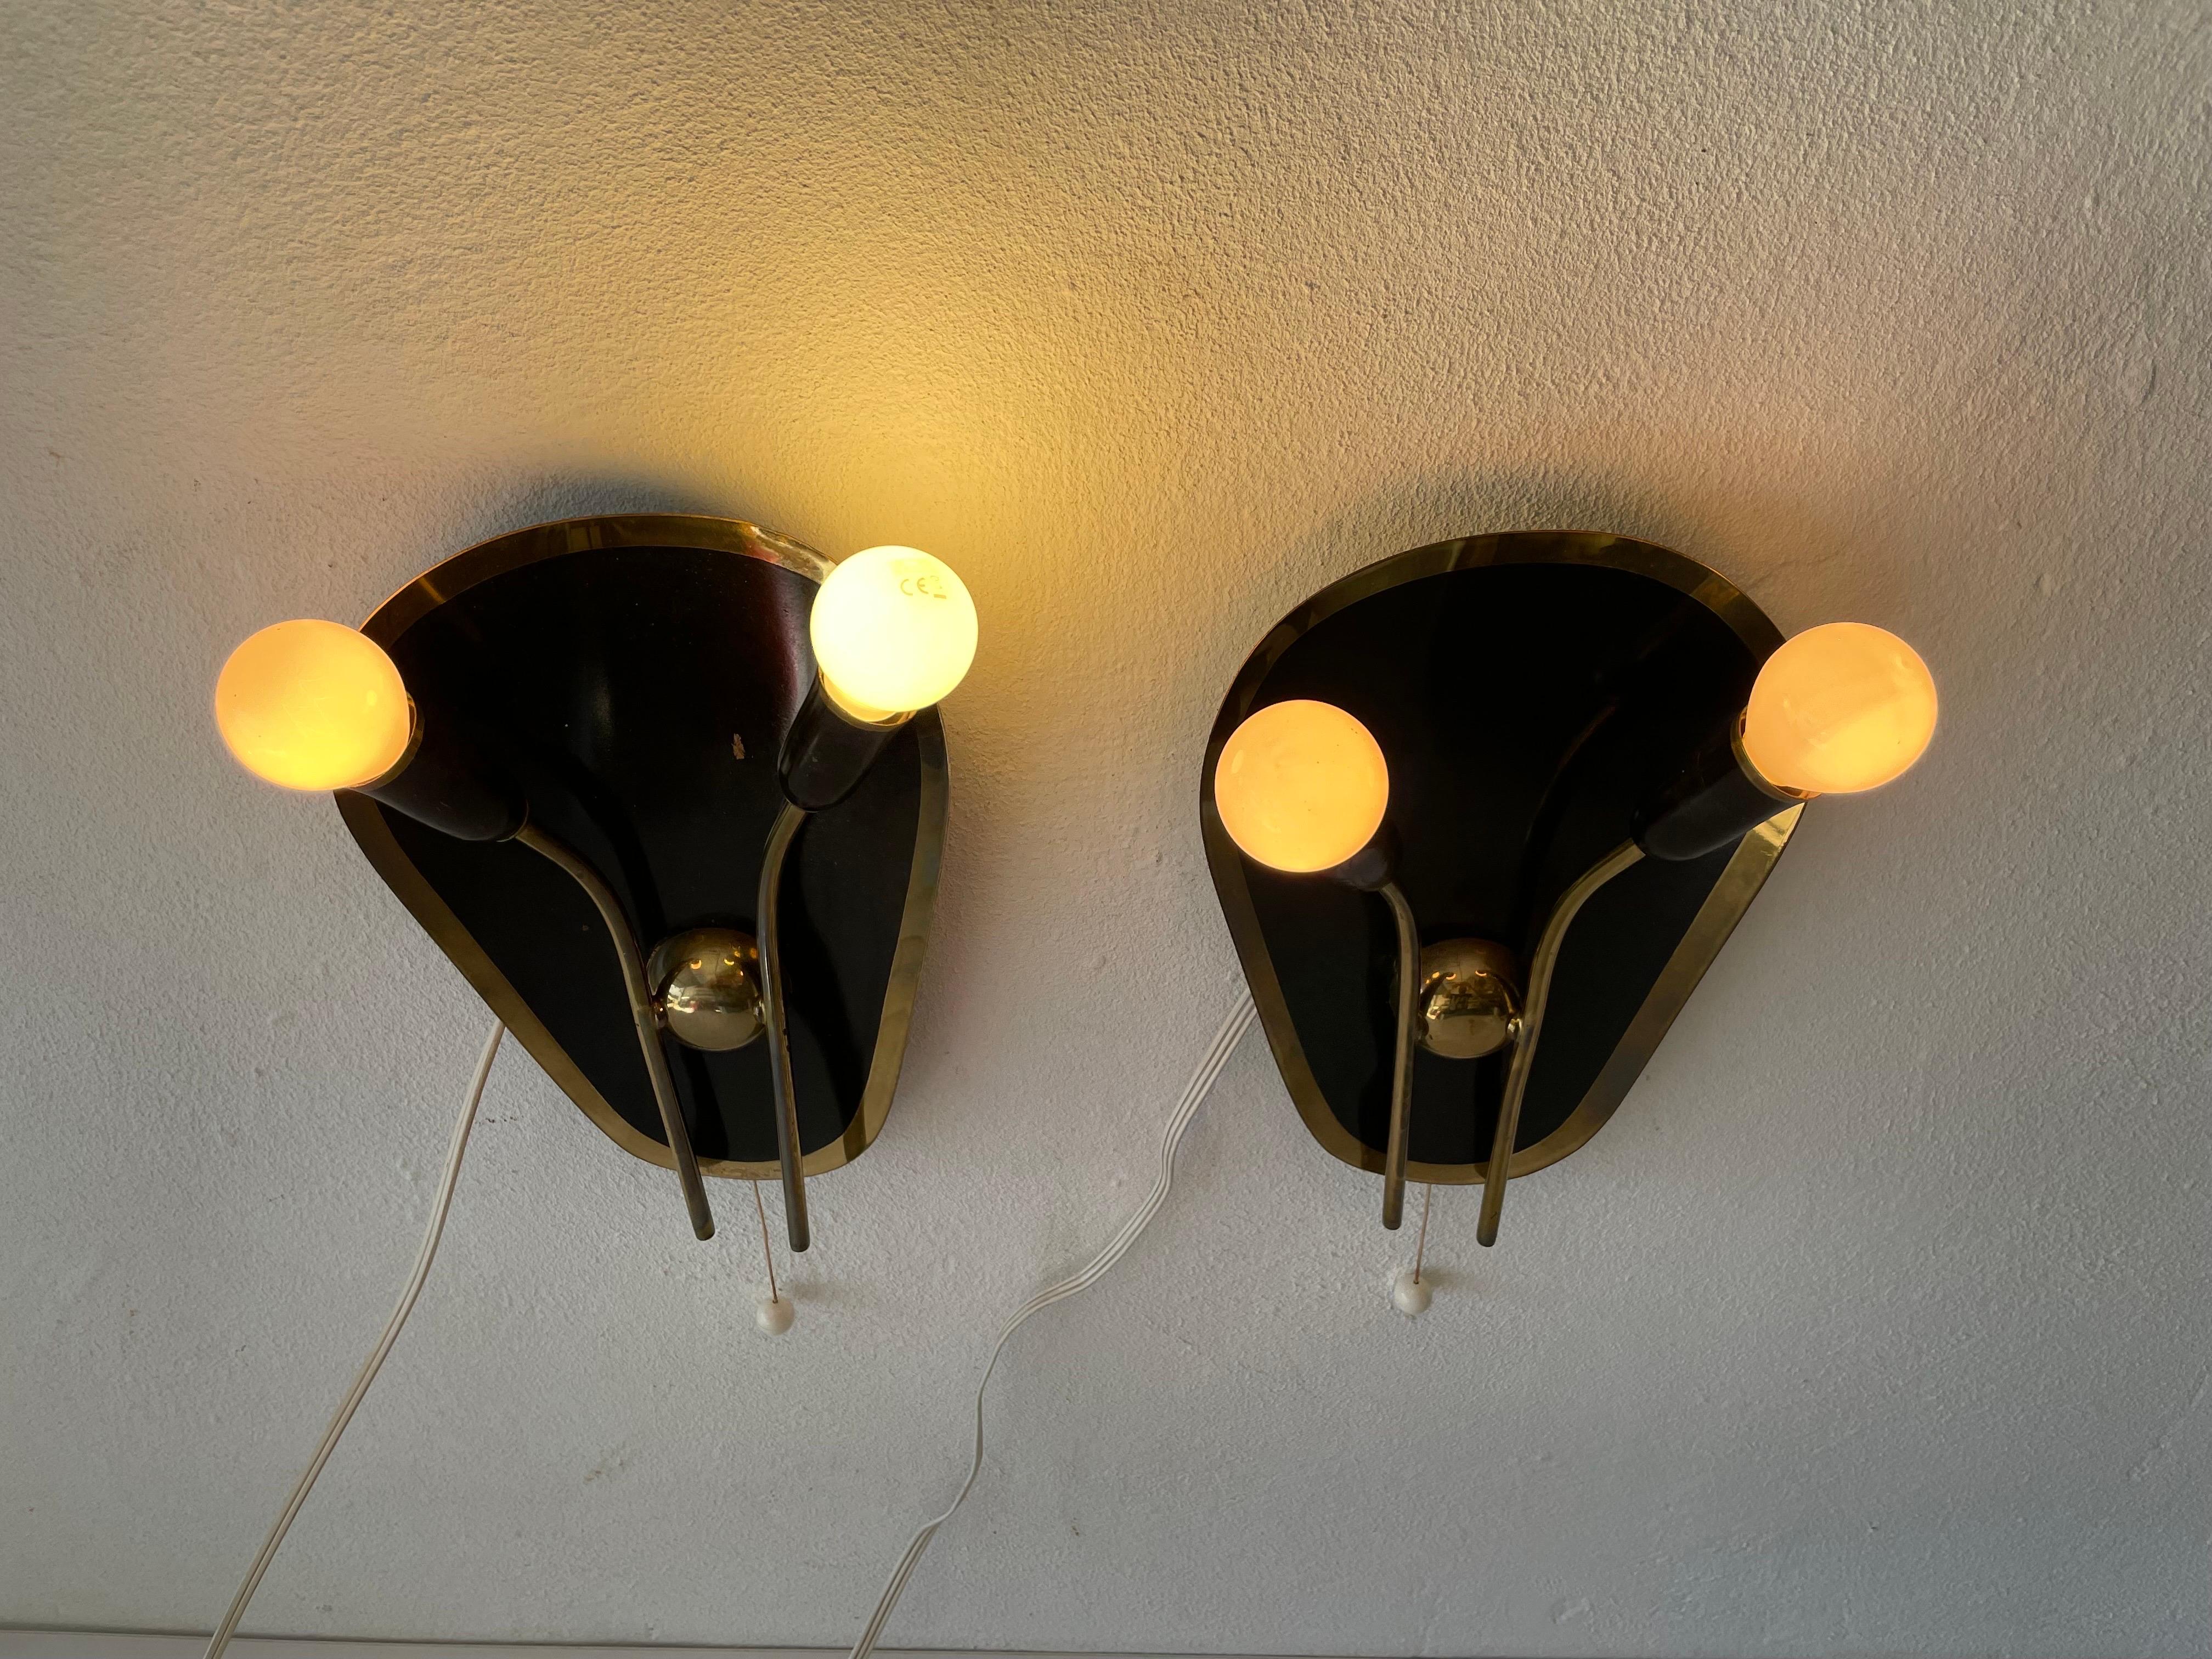 Exclusive Atomic Design Brass Black Metal Pair of Sconces, 1950s, Germany For Sale 5